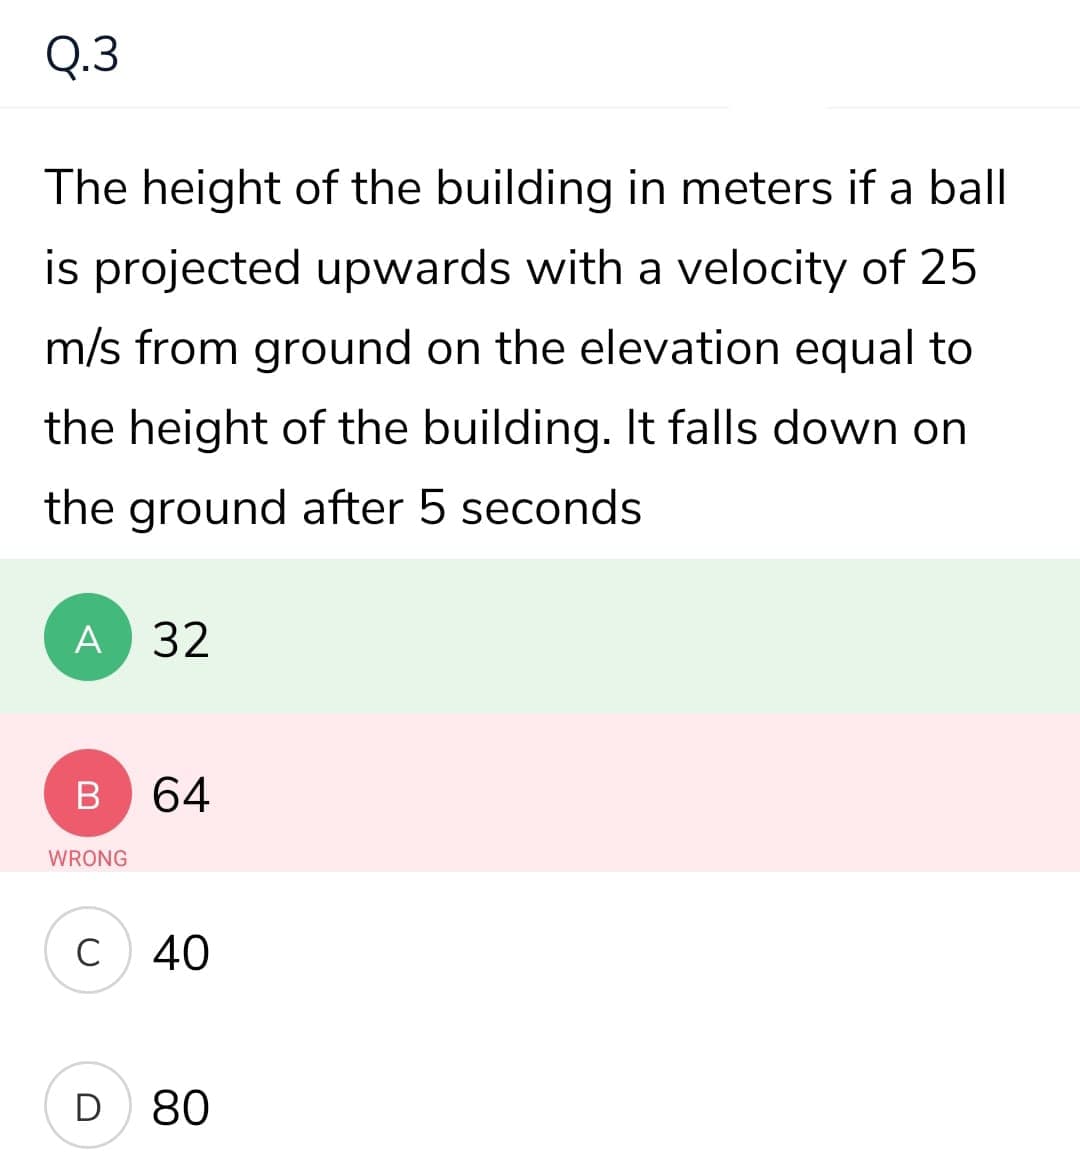 Q.3
The height of the building in meters if a ball
is projected upwards with a velocity of 25
m/s from ground on the elevation equal to
the height of the building. It falls down on
the ground after 5 seconds
A
32
64
WRONG
C
40
D
80
